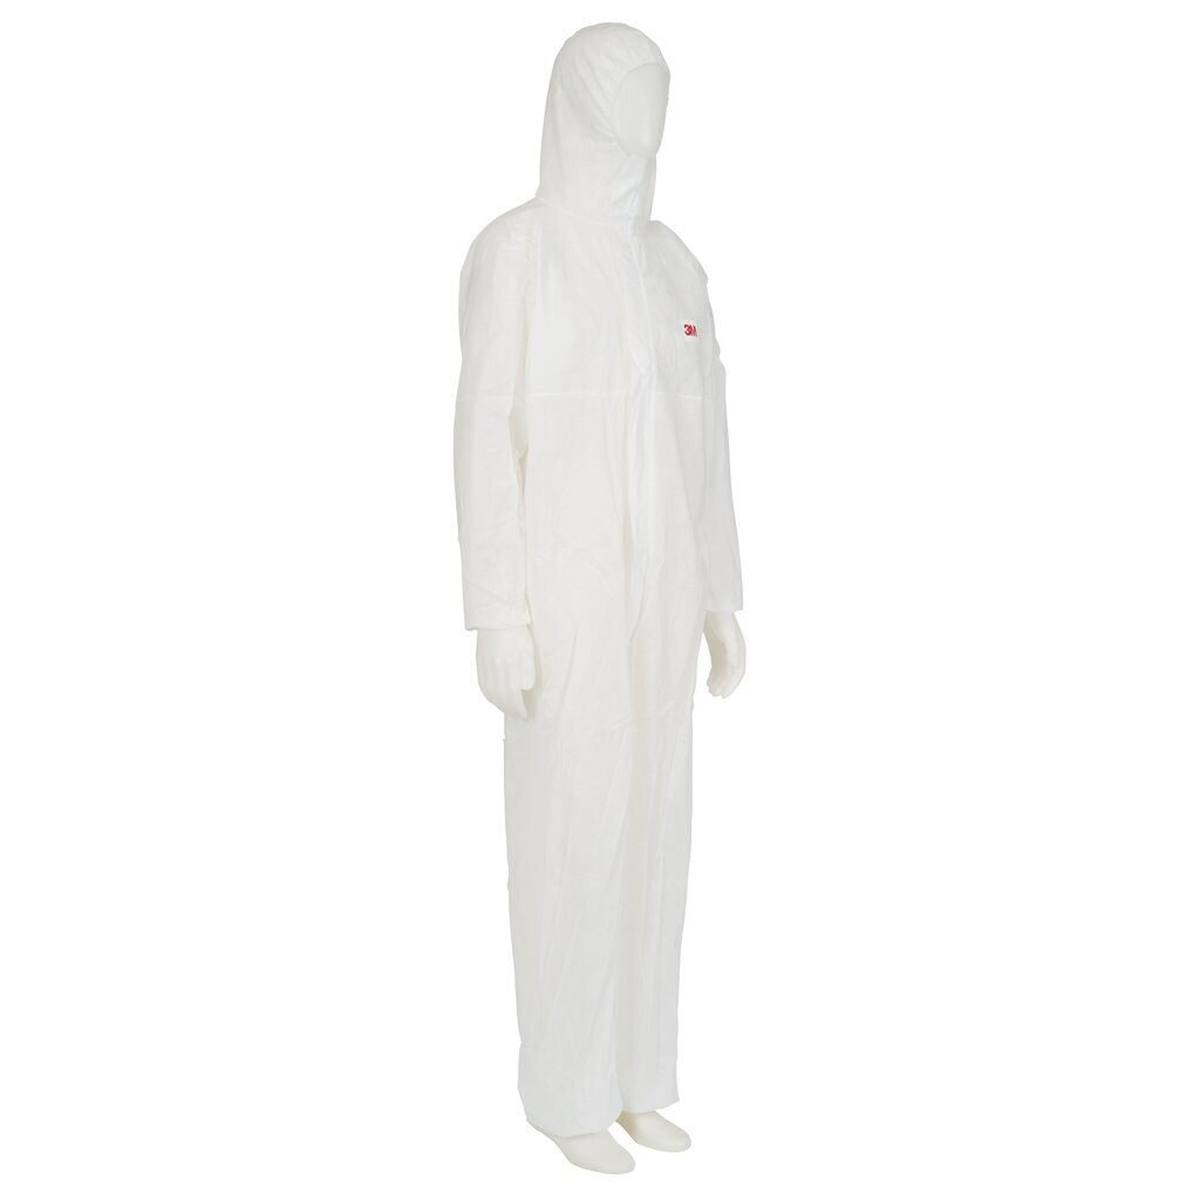 3M 4500 W Protective suit, white, CE, size 4XL, material polypropylene, elasticated cuffs